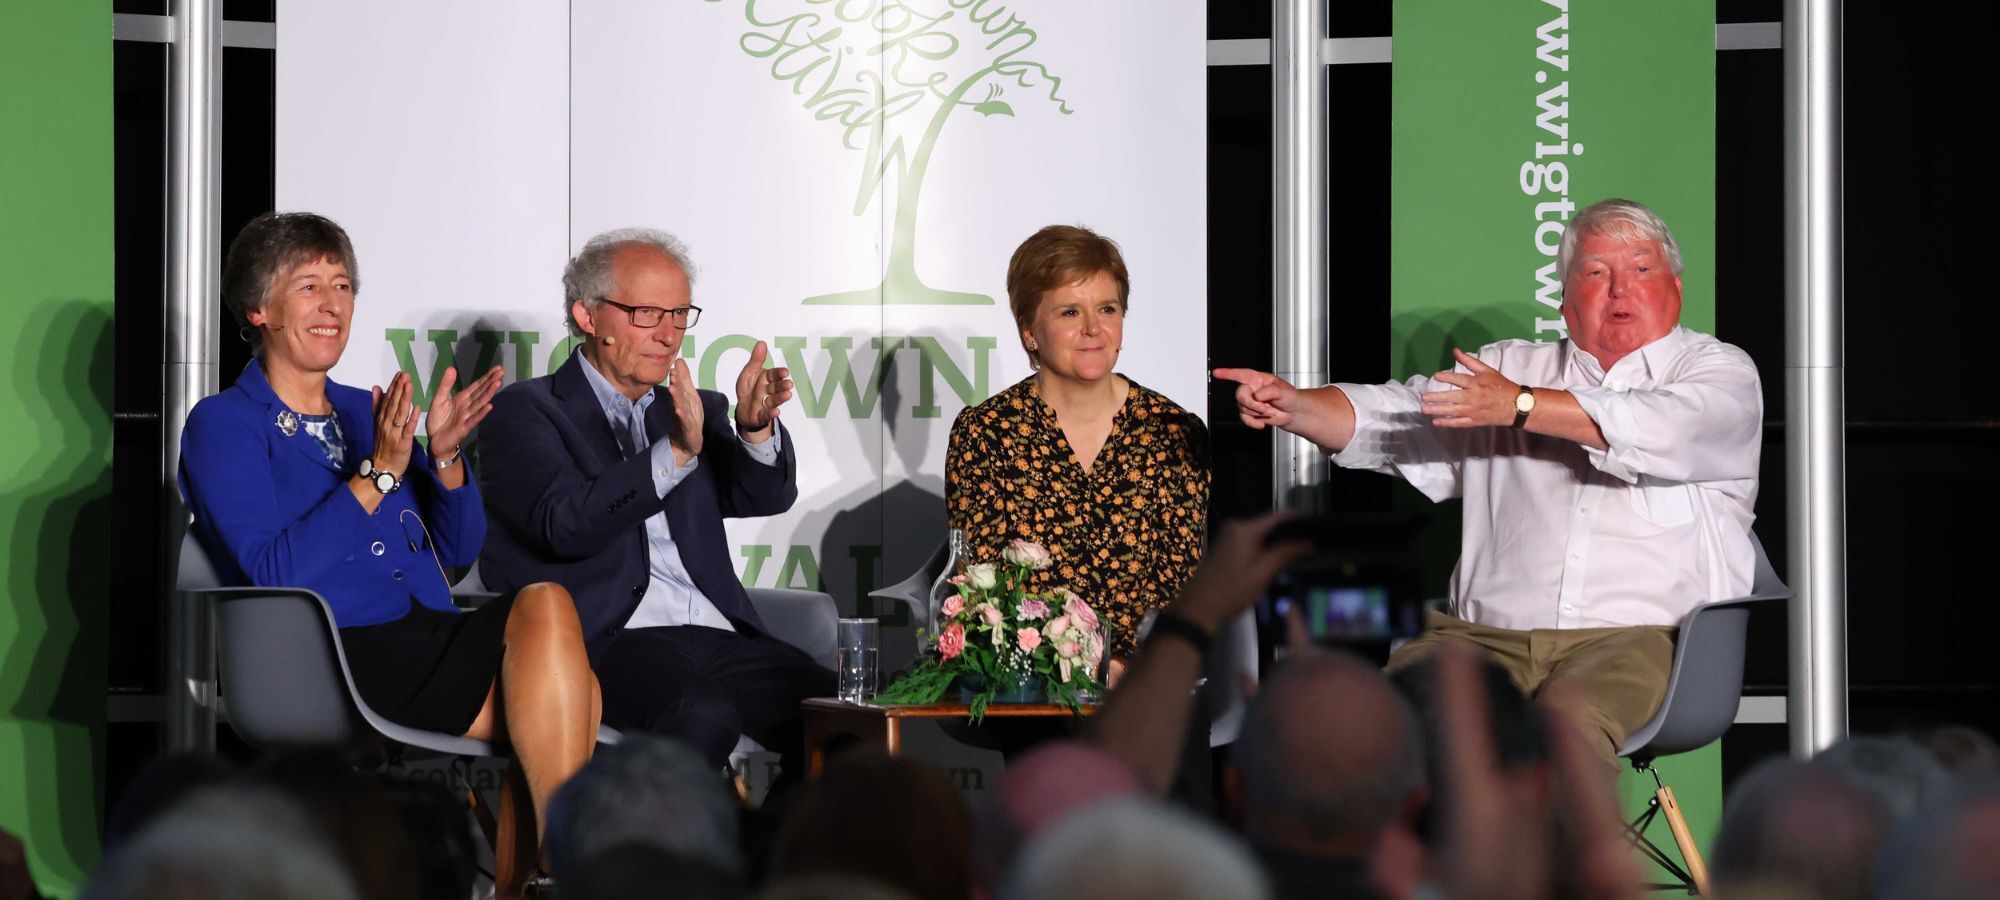 Left to right Liz Smith, Henry McLeish, Nicola Sturgeon and Brian Taylor, seated on stage in front of Wigtown Book Festival banner. Audience blurred in the foreground.